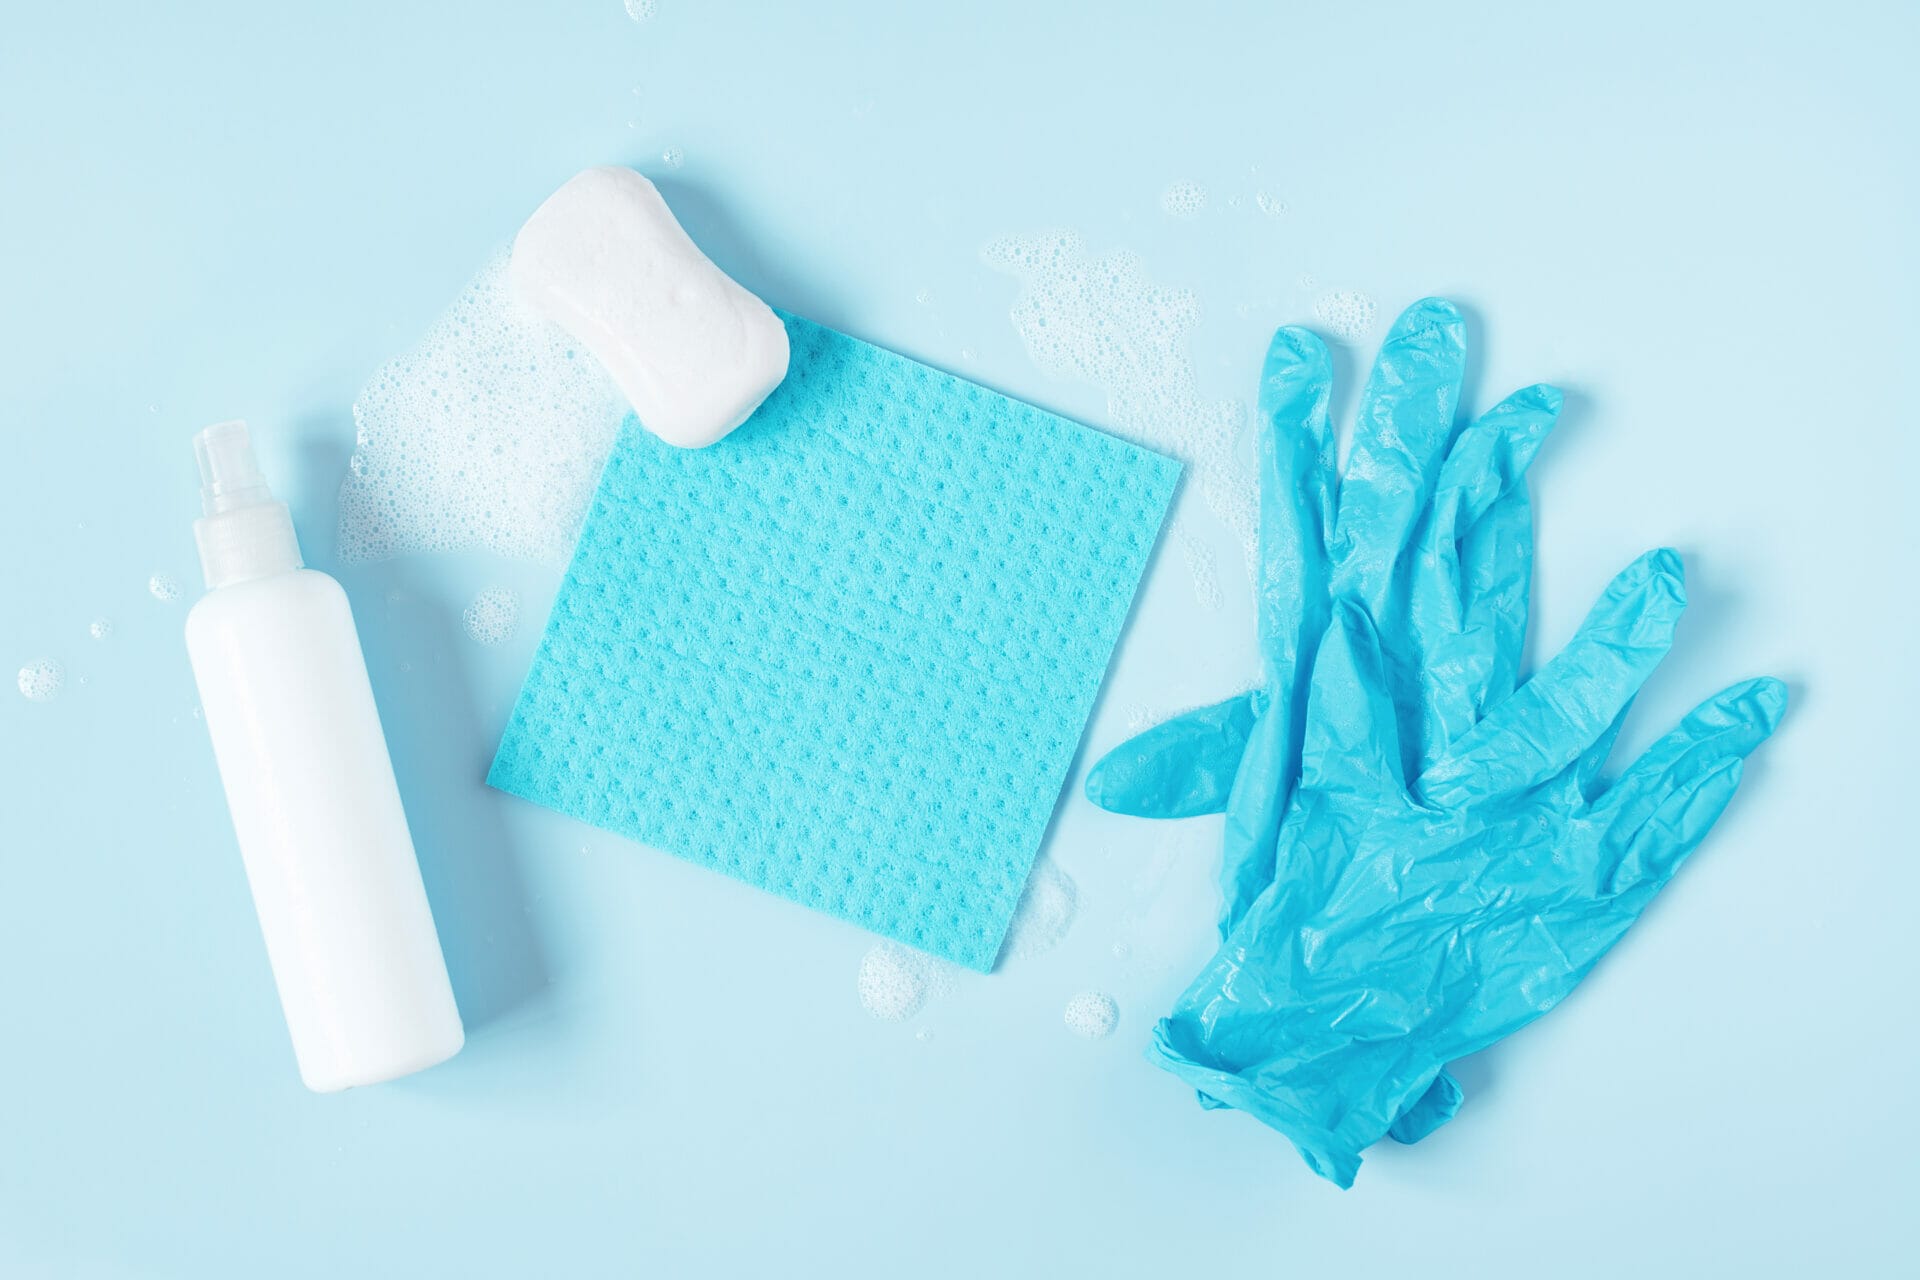 Learn how to clean and disinfect your home with these items